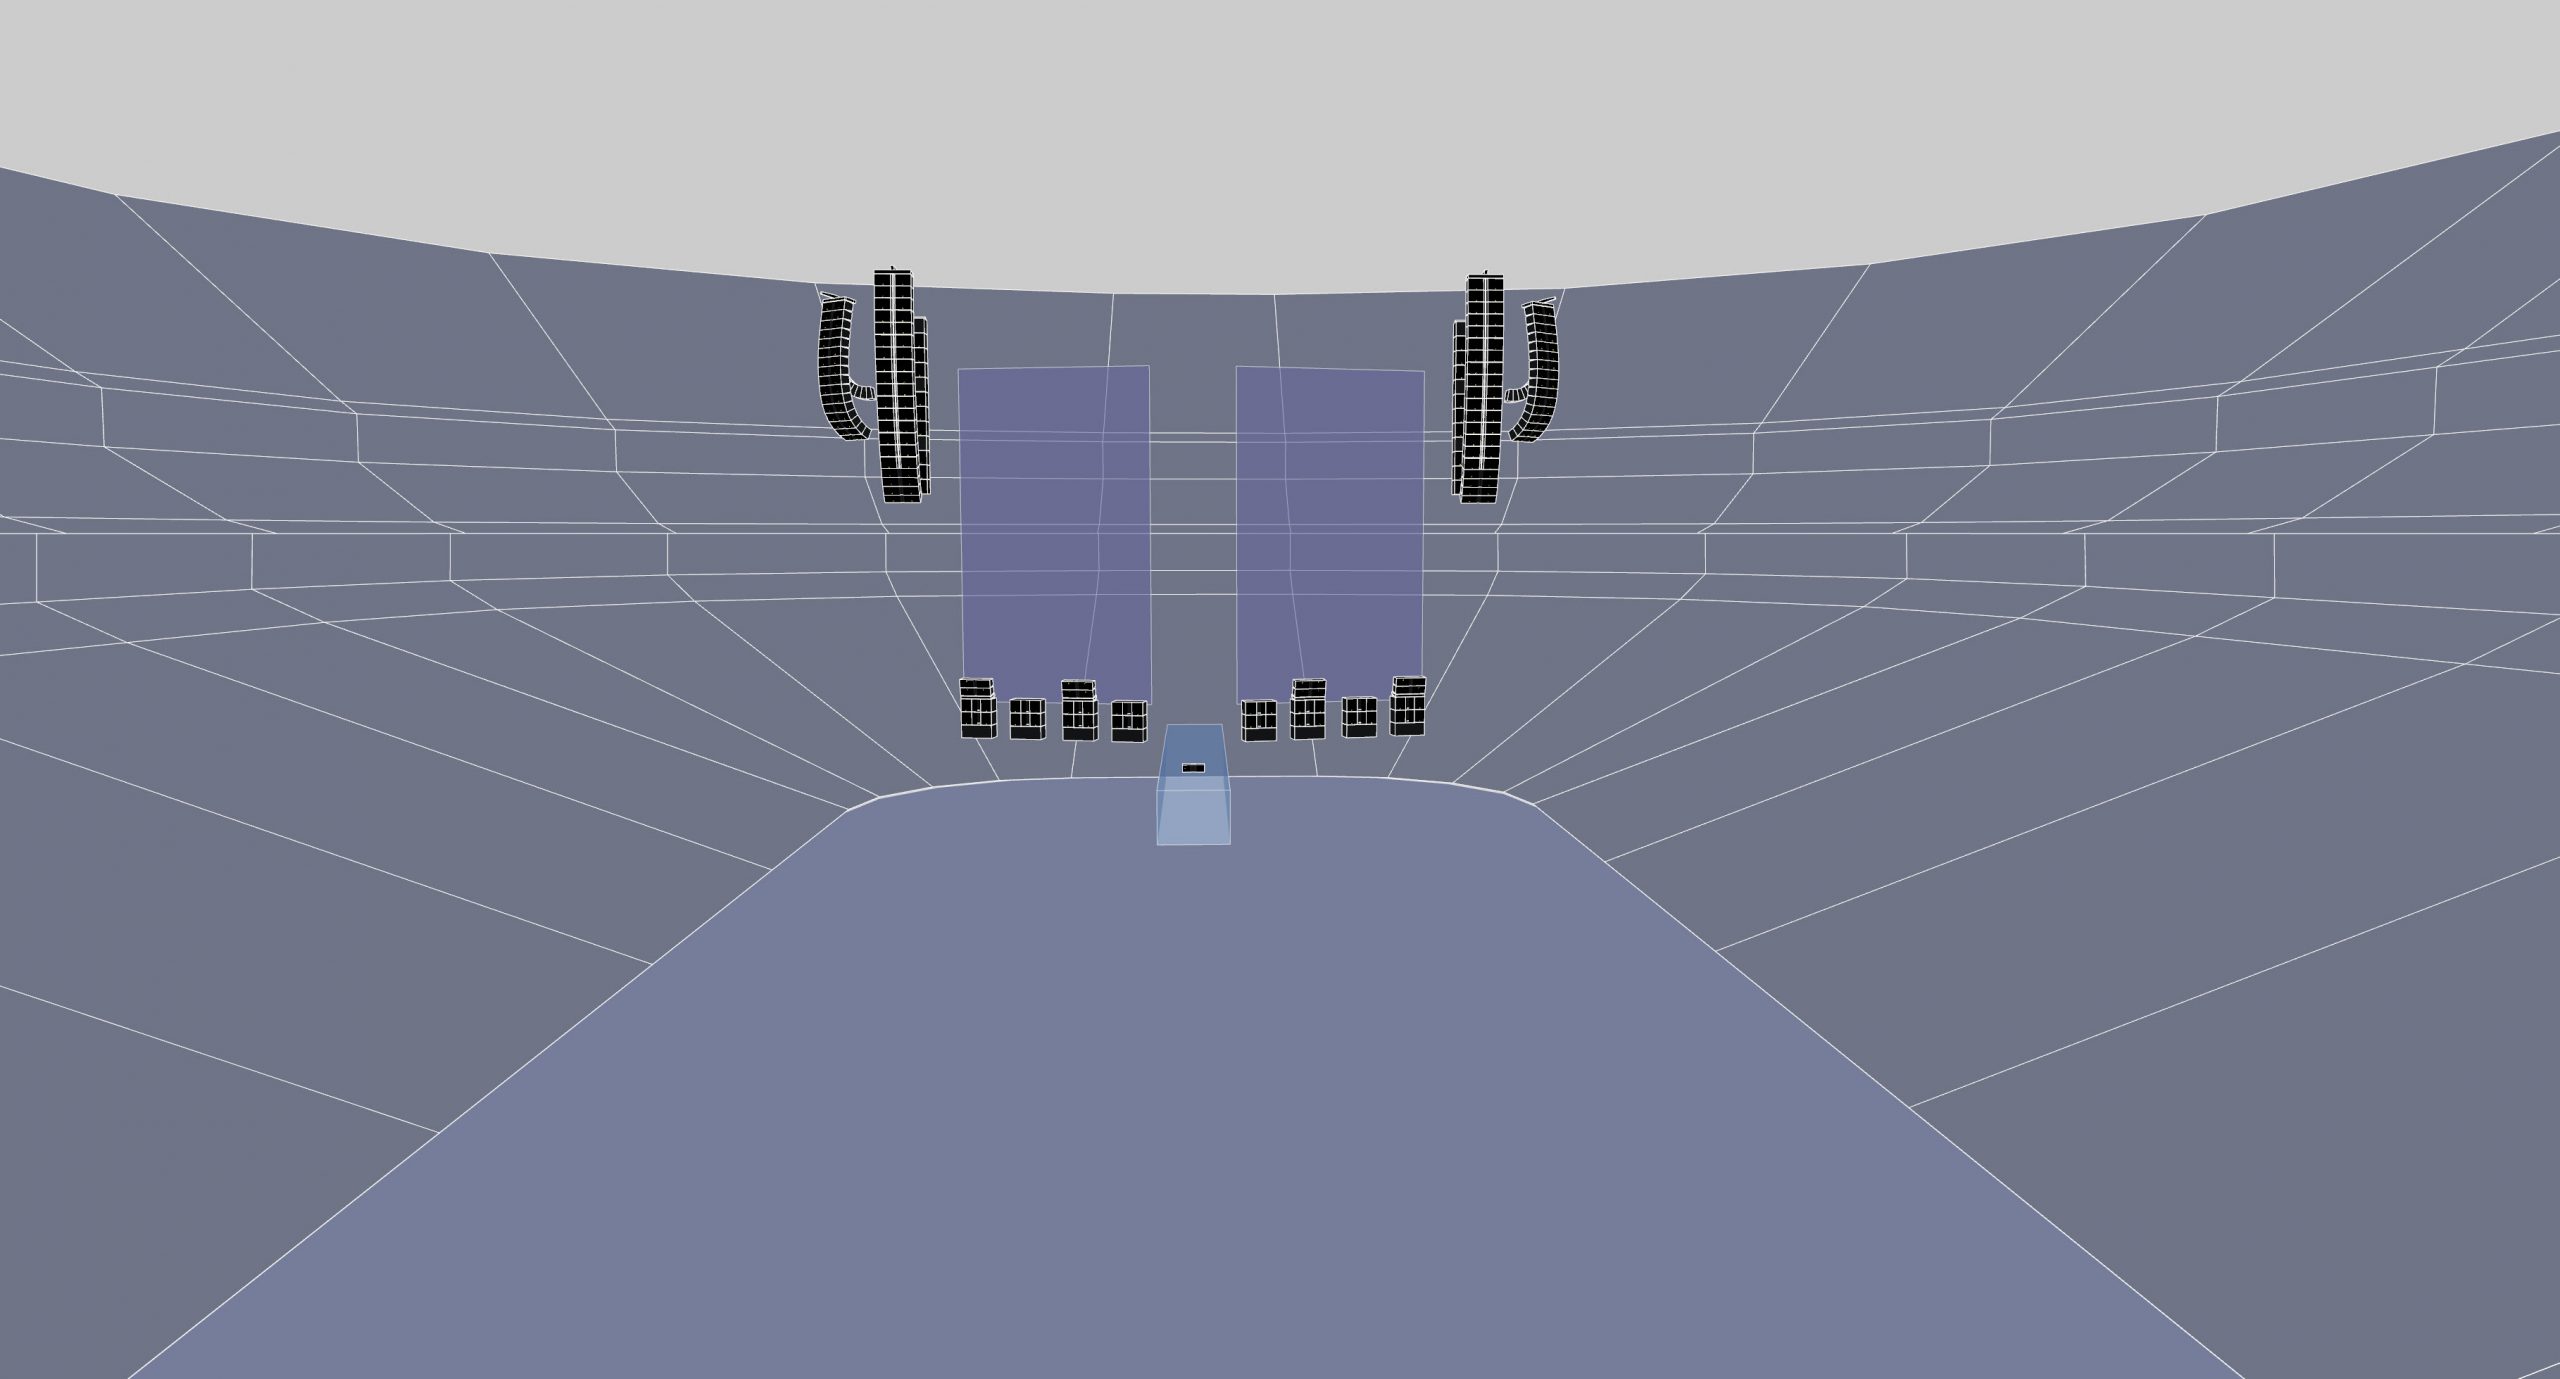 3D Model of sound system set up by L-Acoustics at the Post Malone Runaway Tour